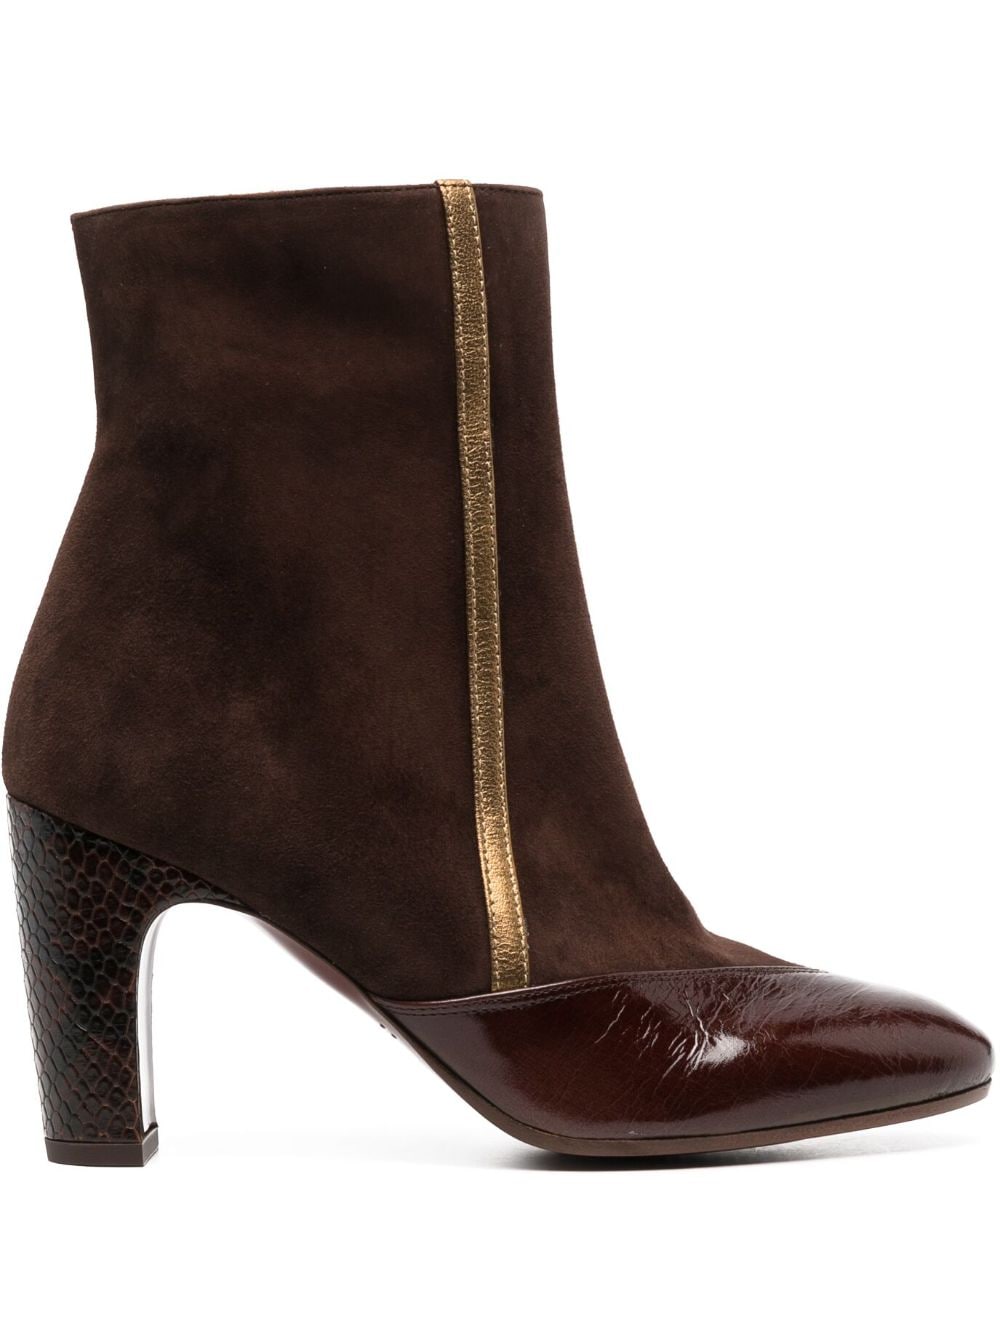 Ewan 75mm leather ankle boots